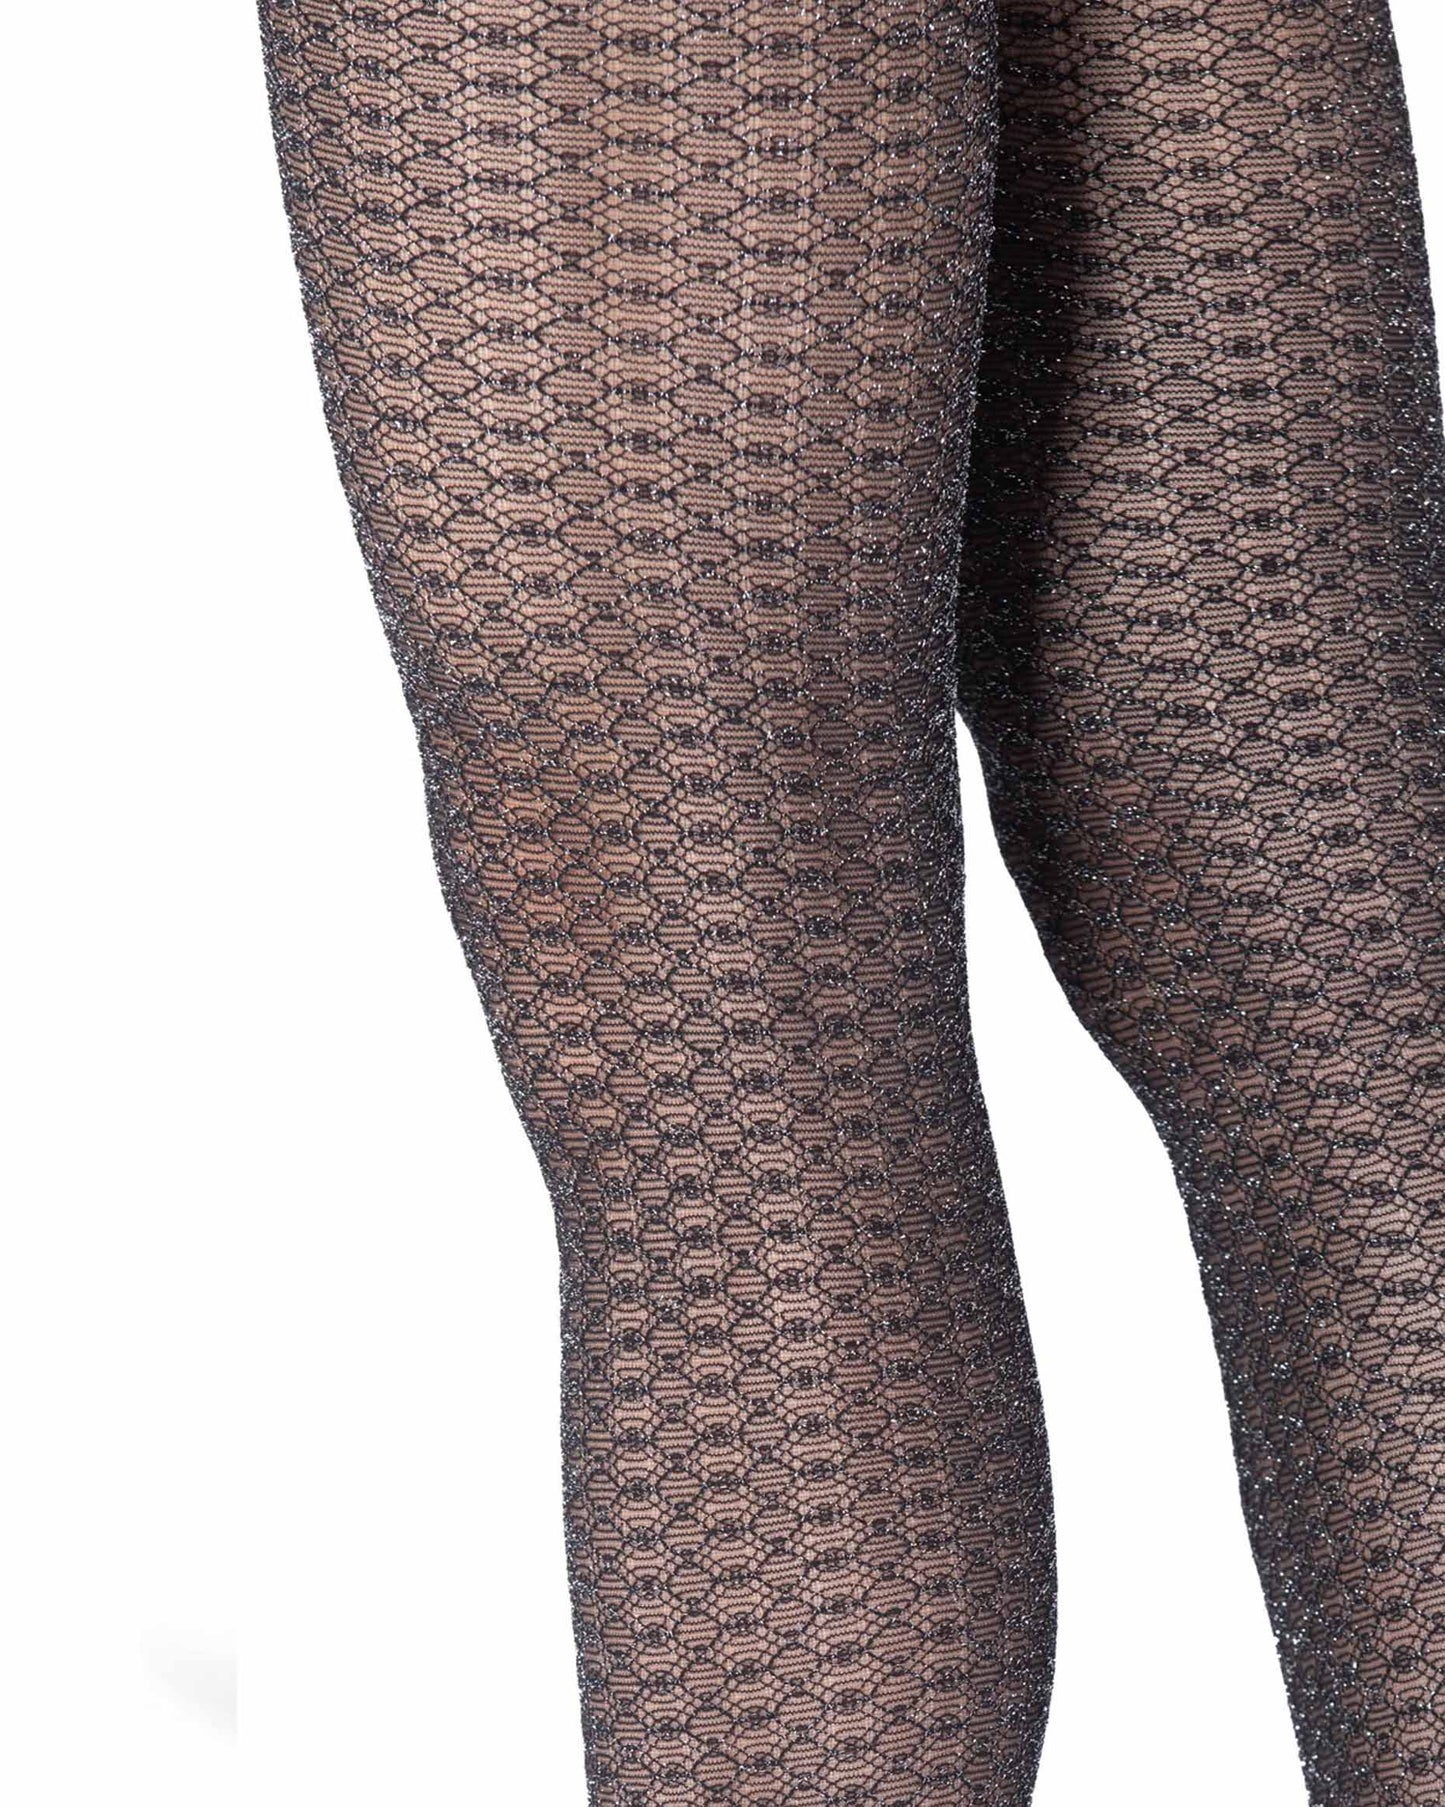 Emilio Cavallini Metallized Beehive Tights - Sheer black micro mesh tights with a circular lace style pattern with sparkly silver lamé lurex